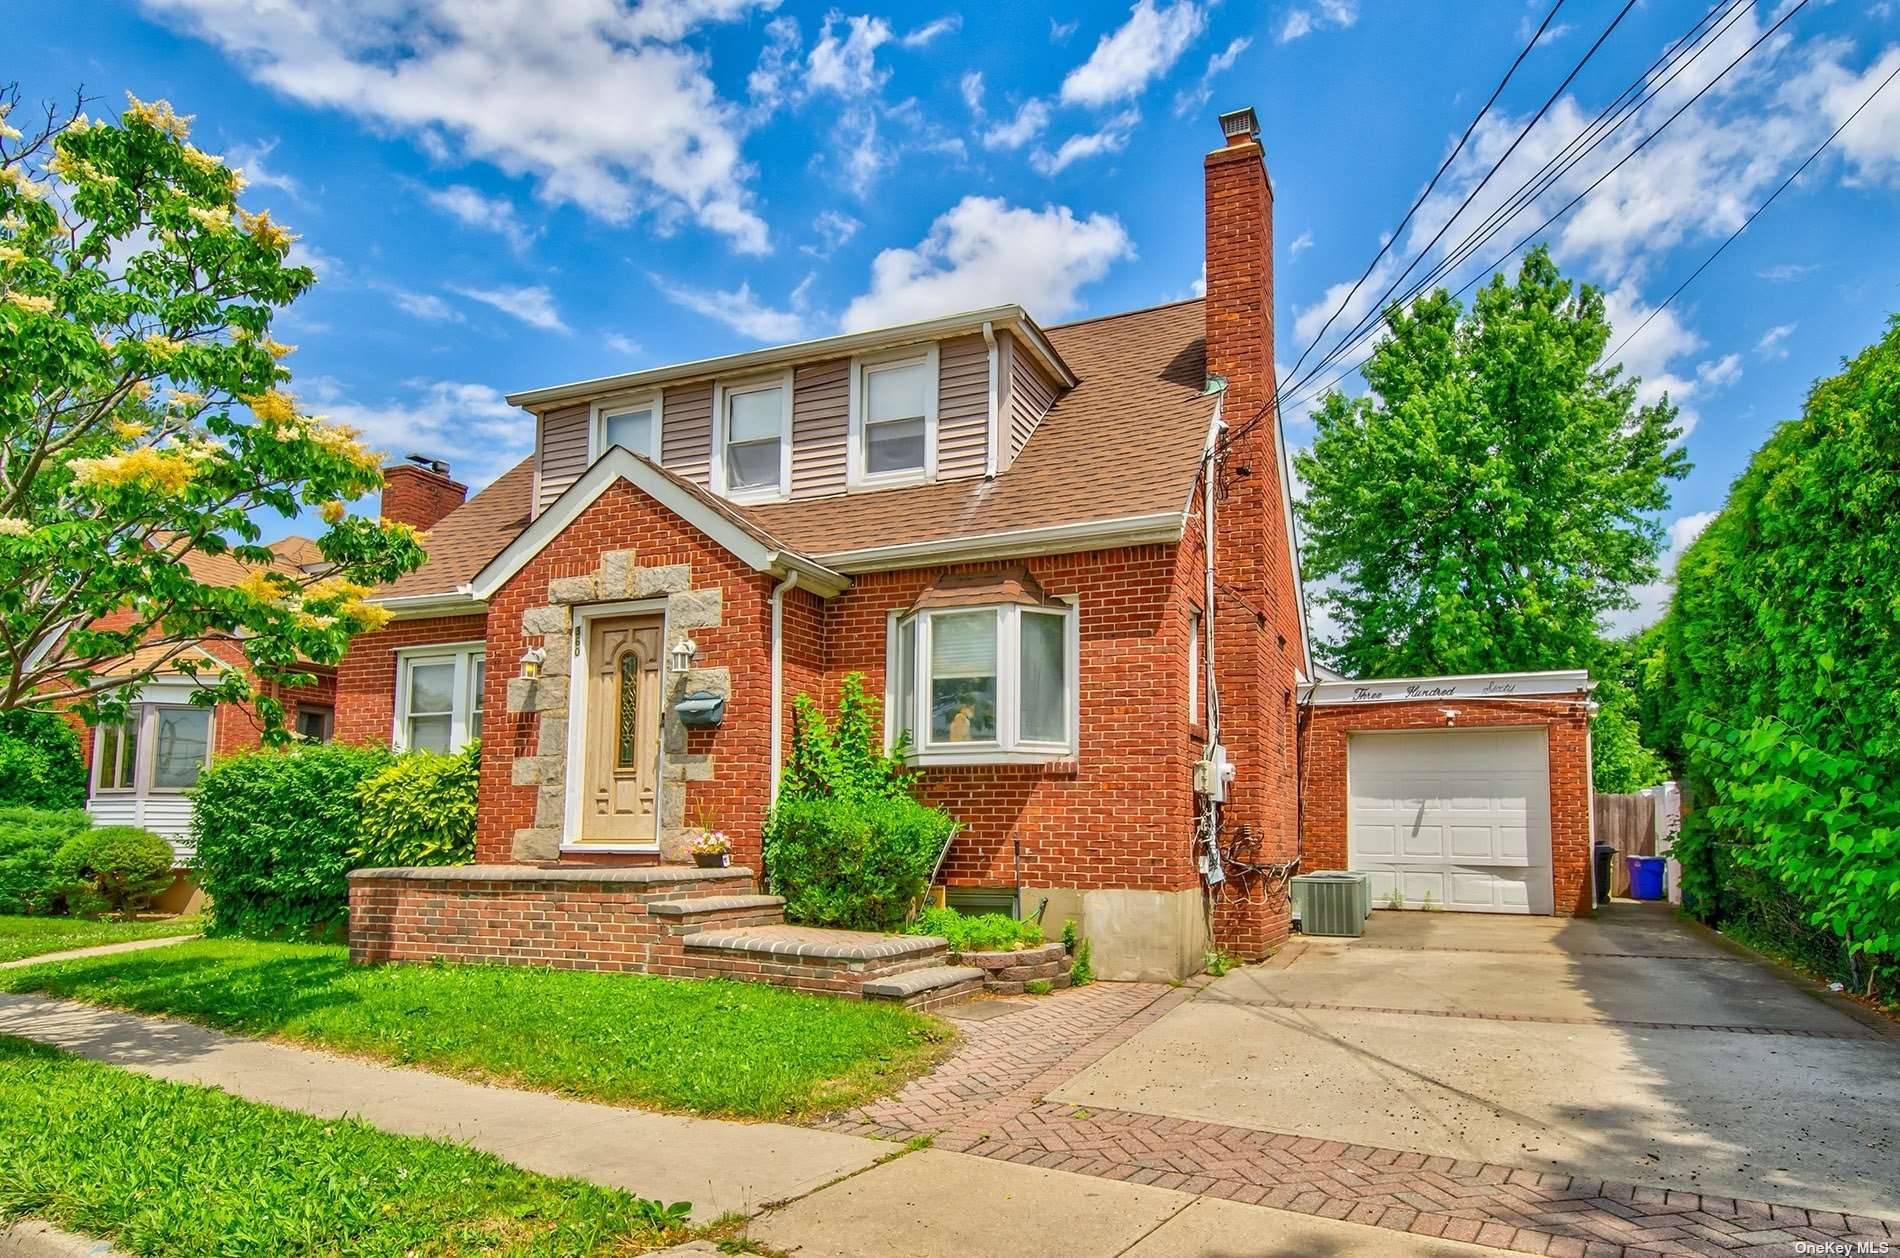 Exp Cape near Train Station and Shopping Center, Featuring 5 Bedrooms, 3 Baths, Den with Sky Lights, Eat in Kitchen, Central A C, Wood Fireplace, Hardwood Floors, Large Deck, Brick ...